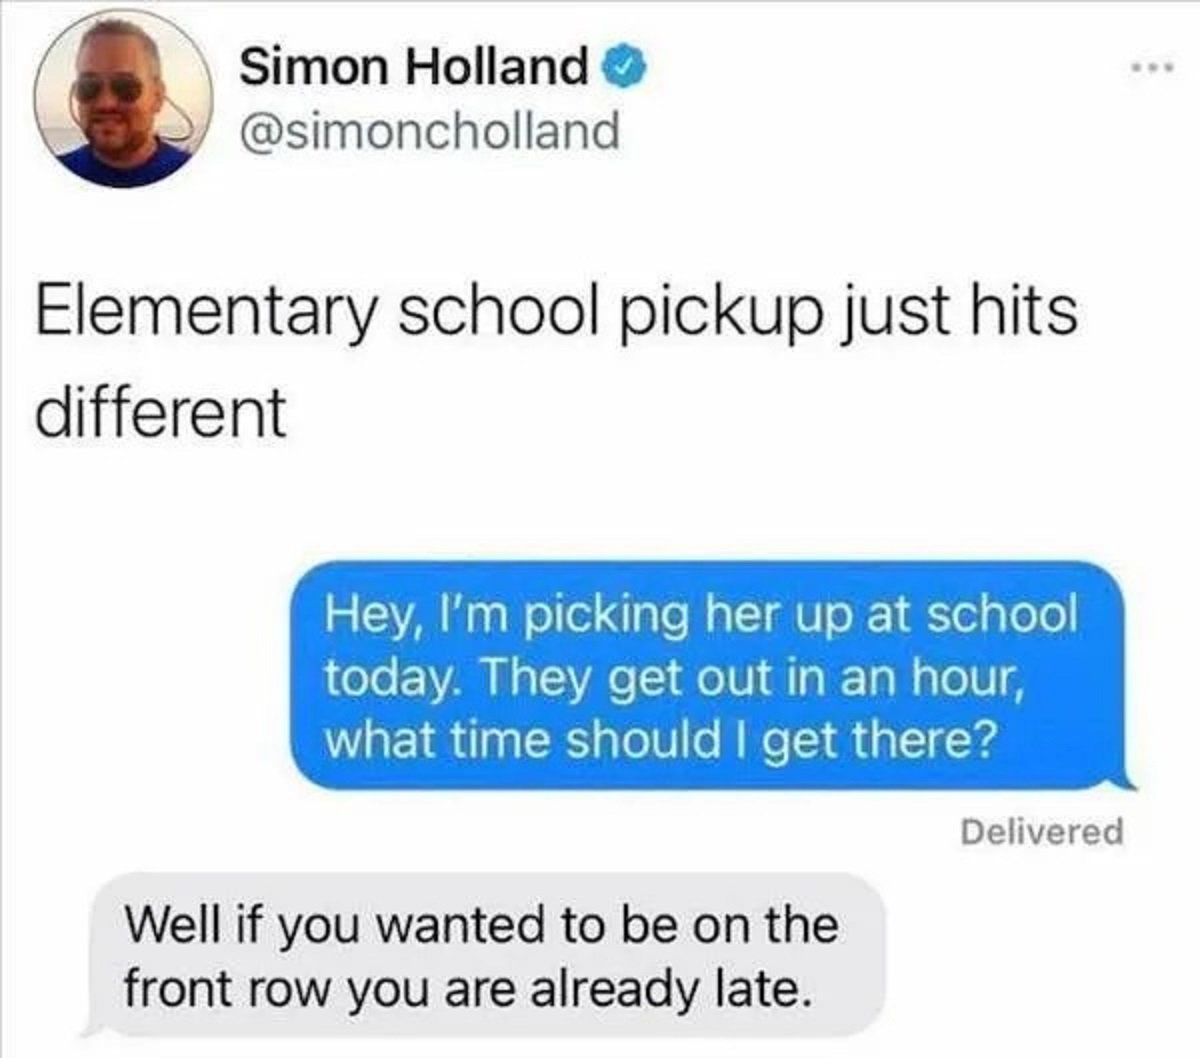 screenshot - Simon Holland Elementary school pickup just hits different Hey, I'm picking her up at school today. They get out in an hour, what time should I get there? Well if you wanted to be on the front row you are already late. Delivered